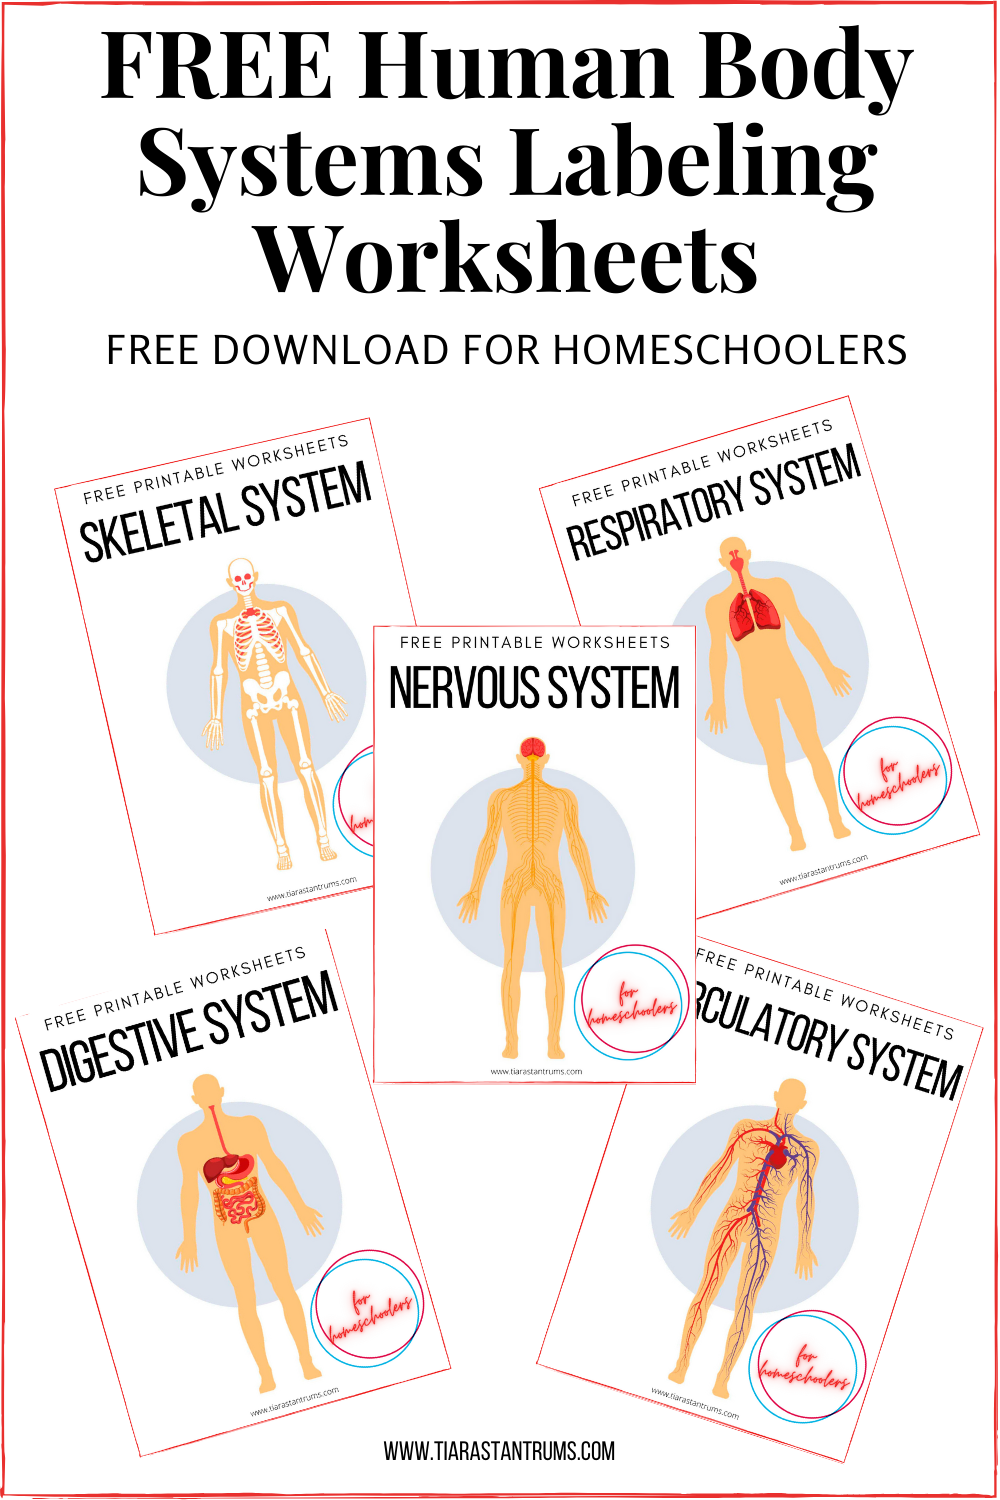 free-human-body-systems-labeling-worksheets-tiaras-tantrums-free